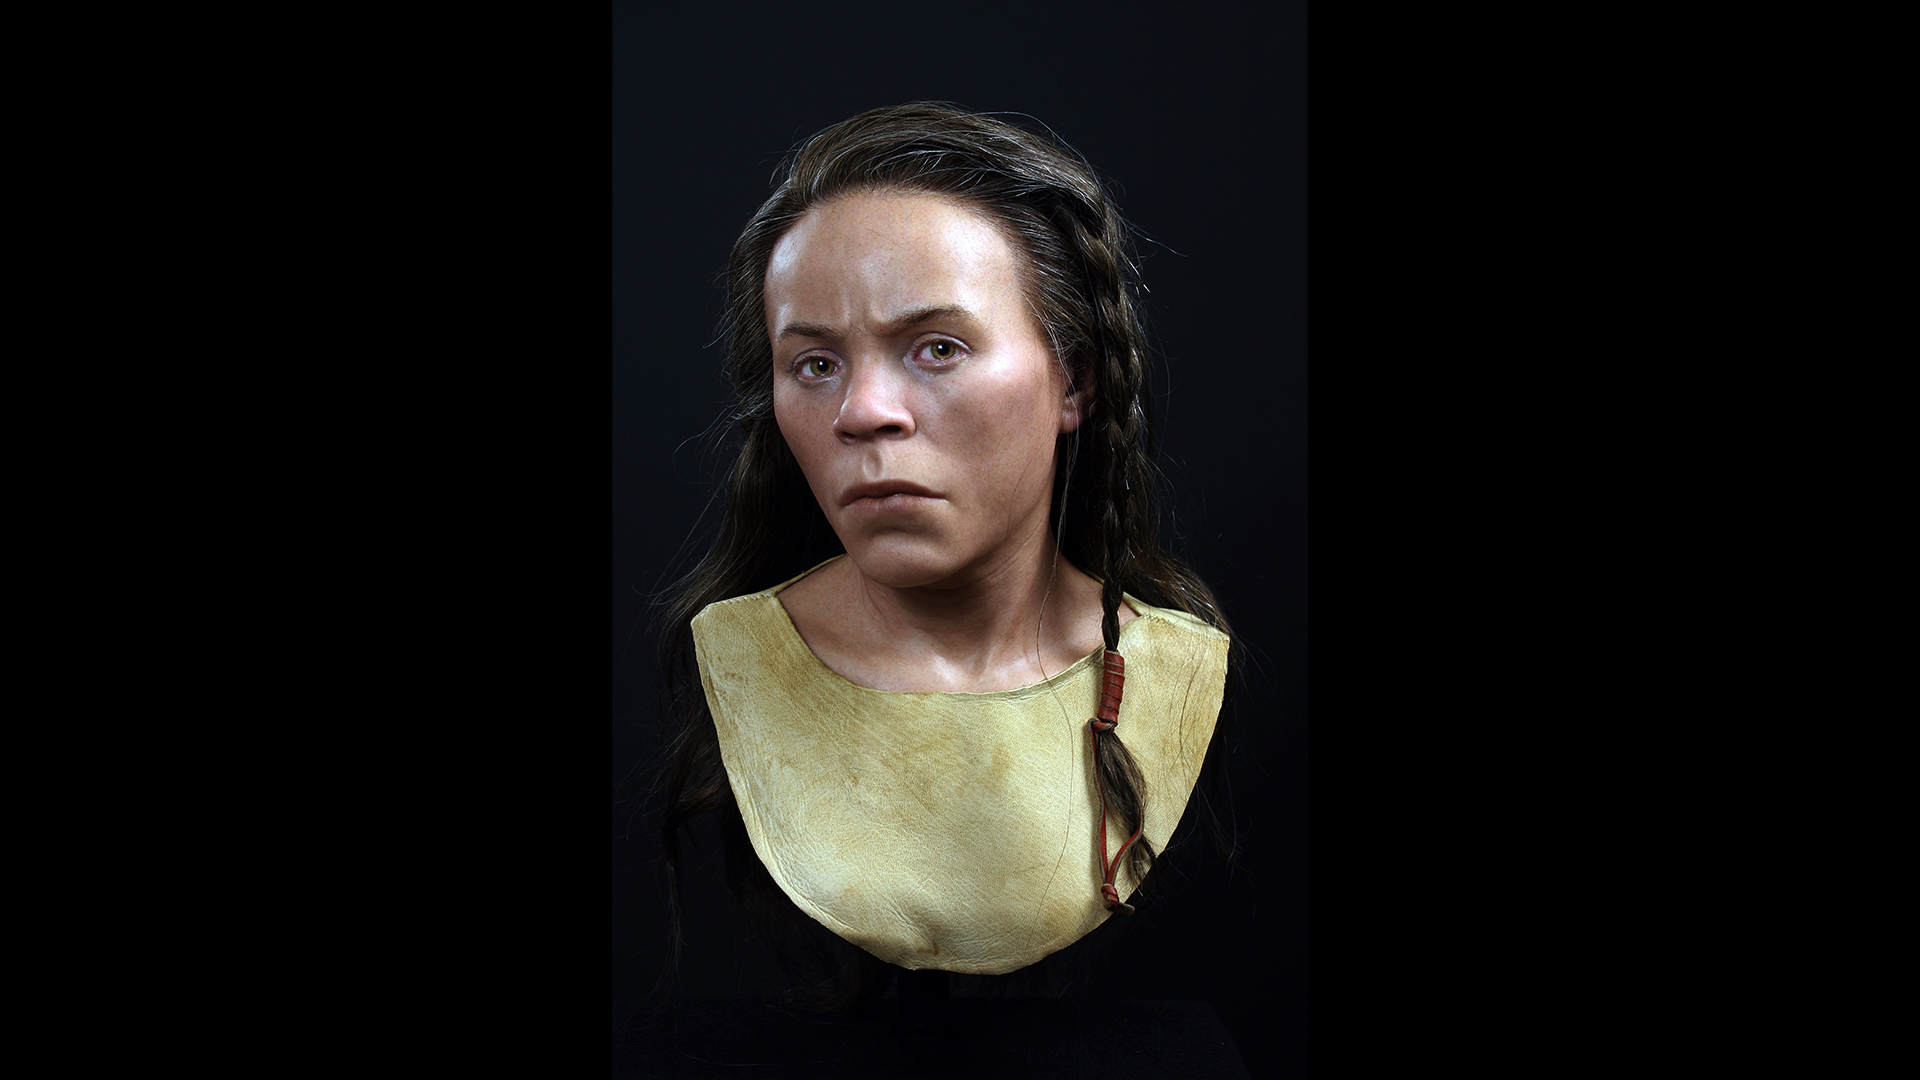 Completed facial reconstruction from the Kilmartin Museum.